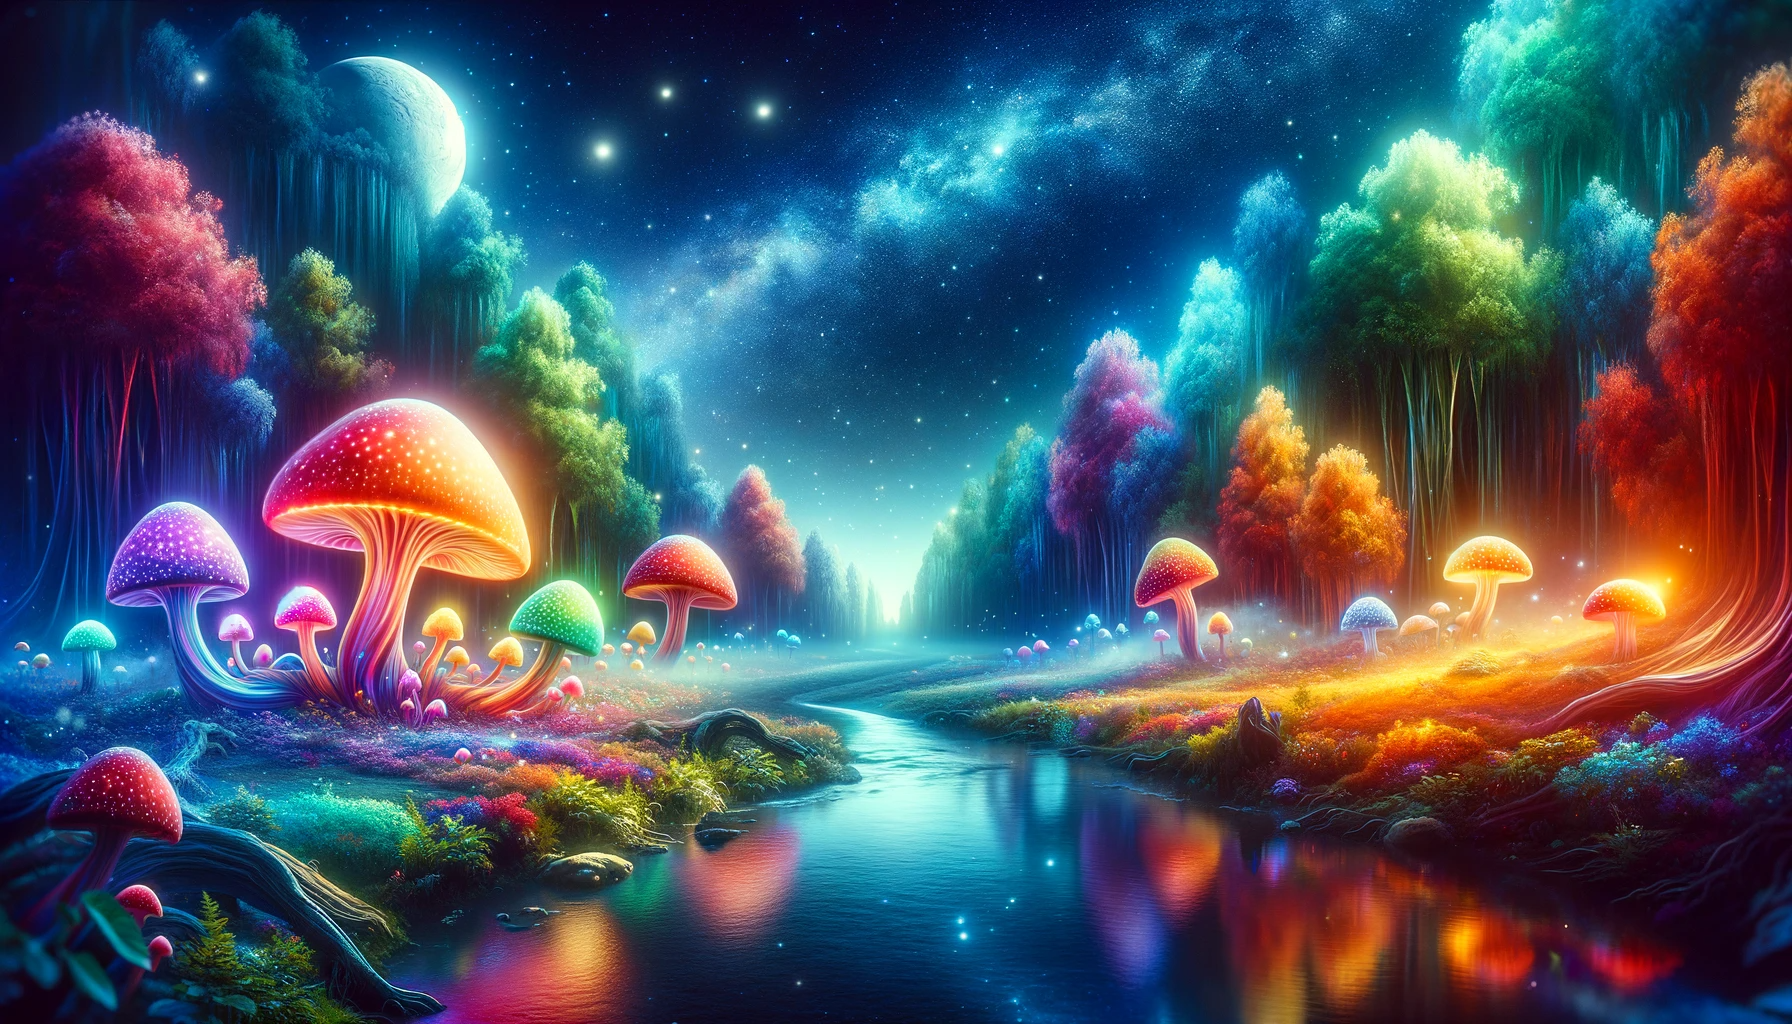 ·E 2023 11 19 03.51.24   A surreal and dreamlike landscape for a blog feature image, showcasing a vivid, colorful environment that merges elements of fantasy and reality. The .png